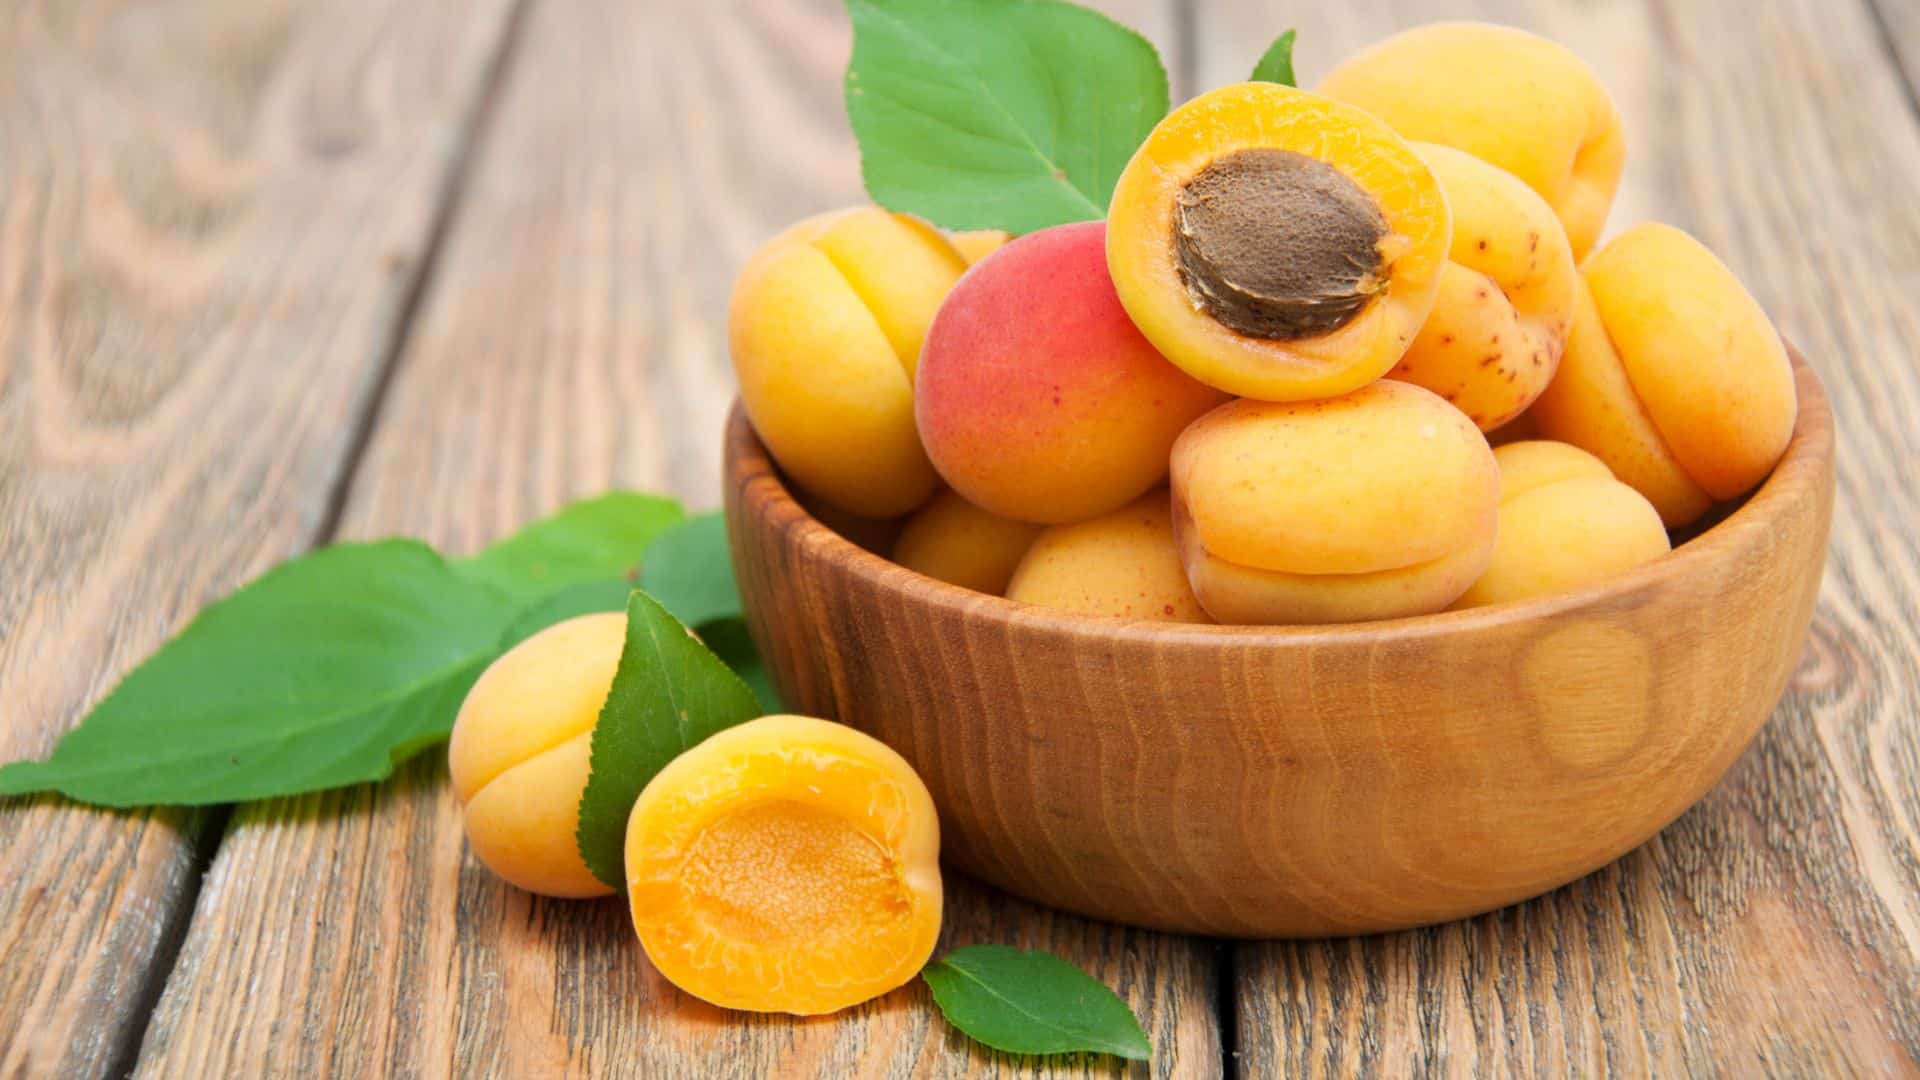 A bowl of apricots